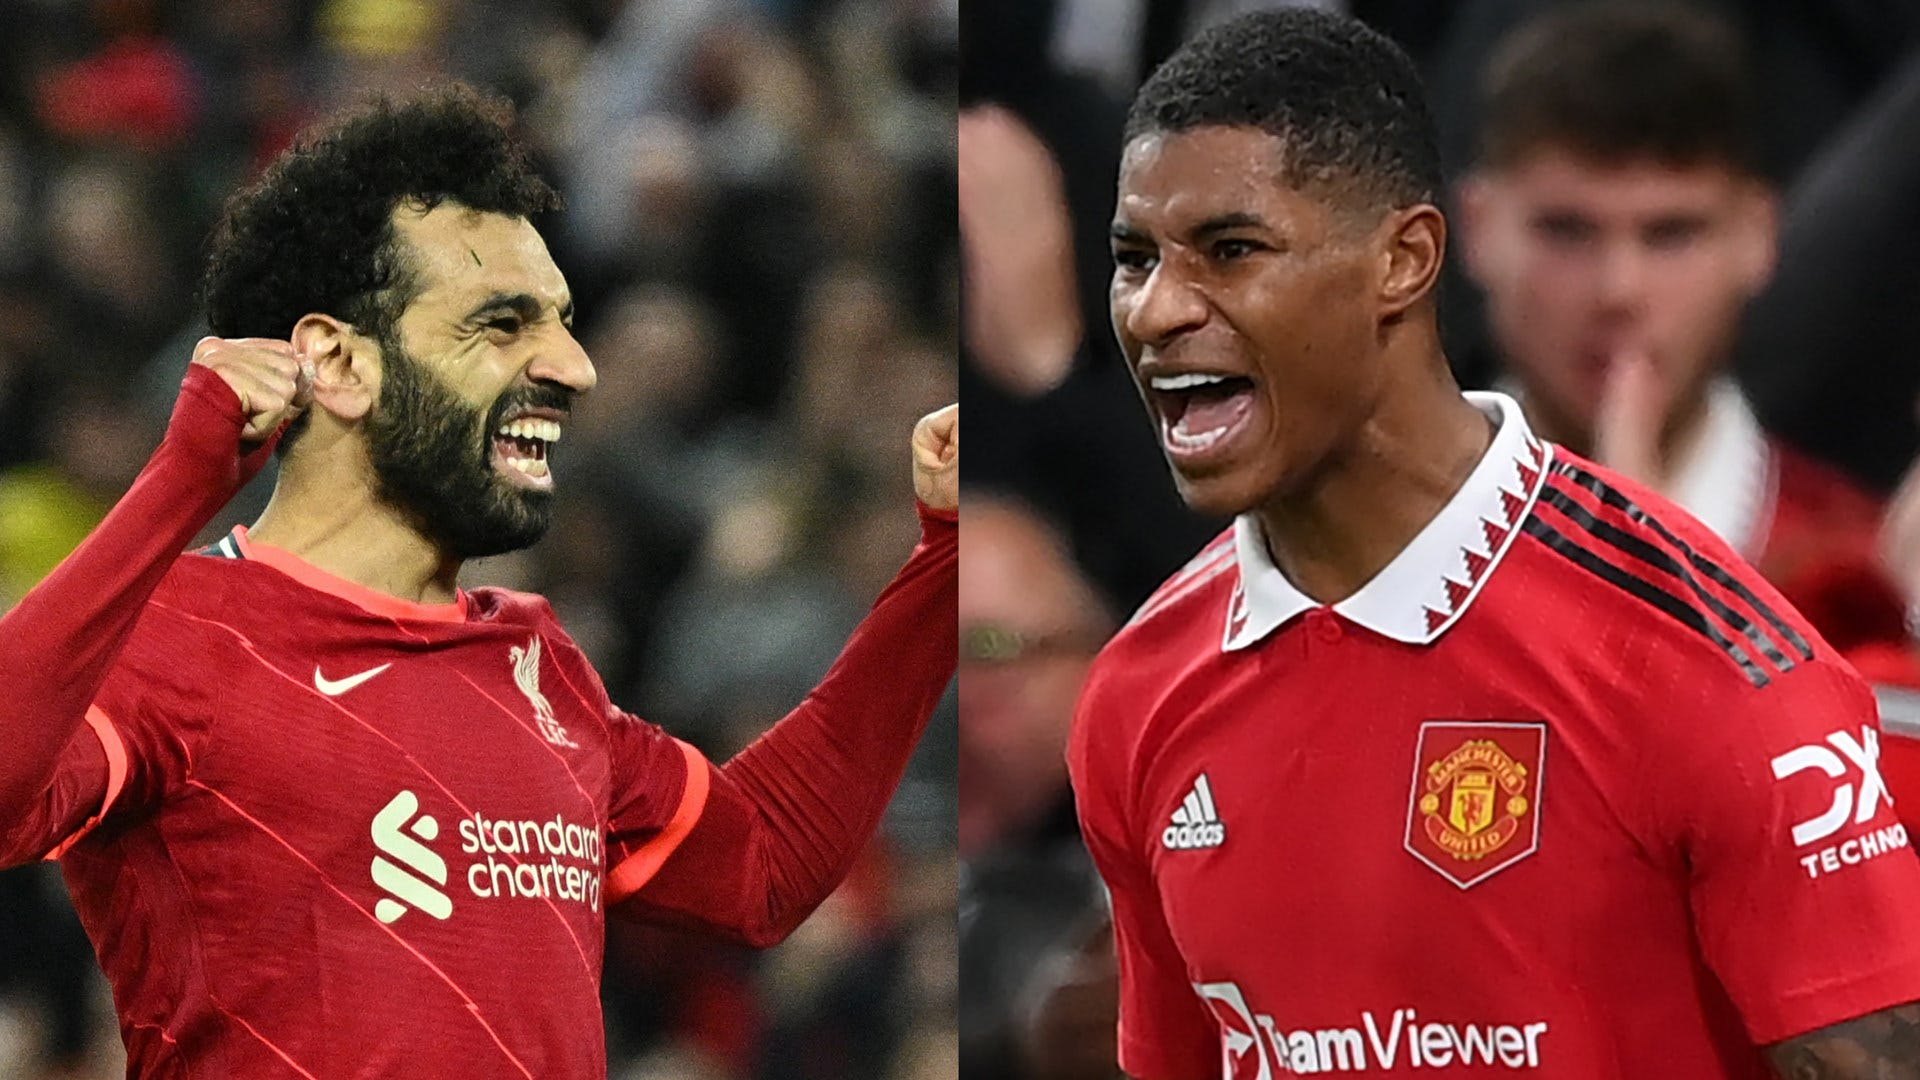 Liverpool vs Manchester United Live stream, TV channel, kick-off time and where to watch Goal US